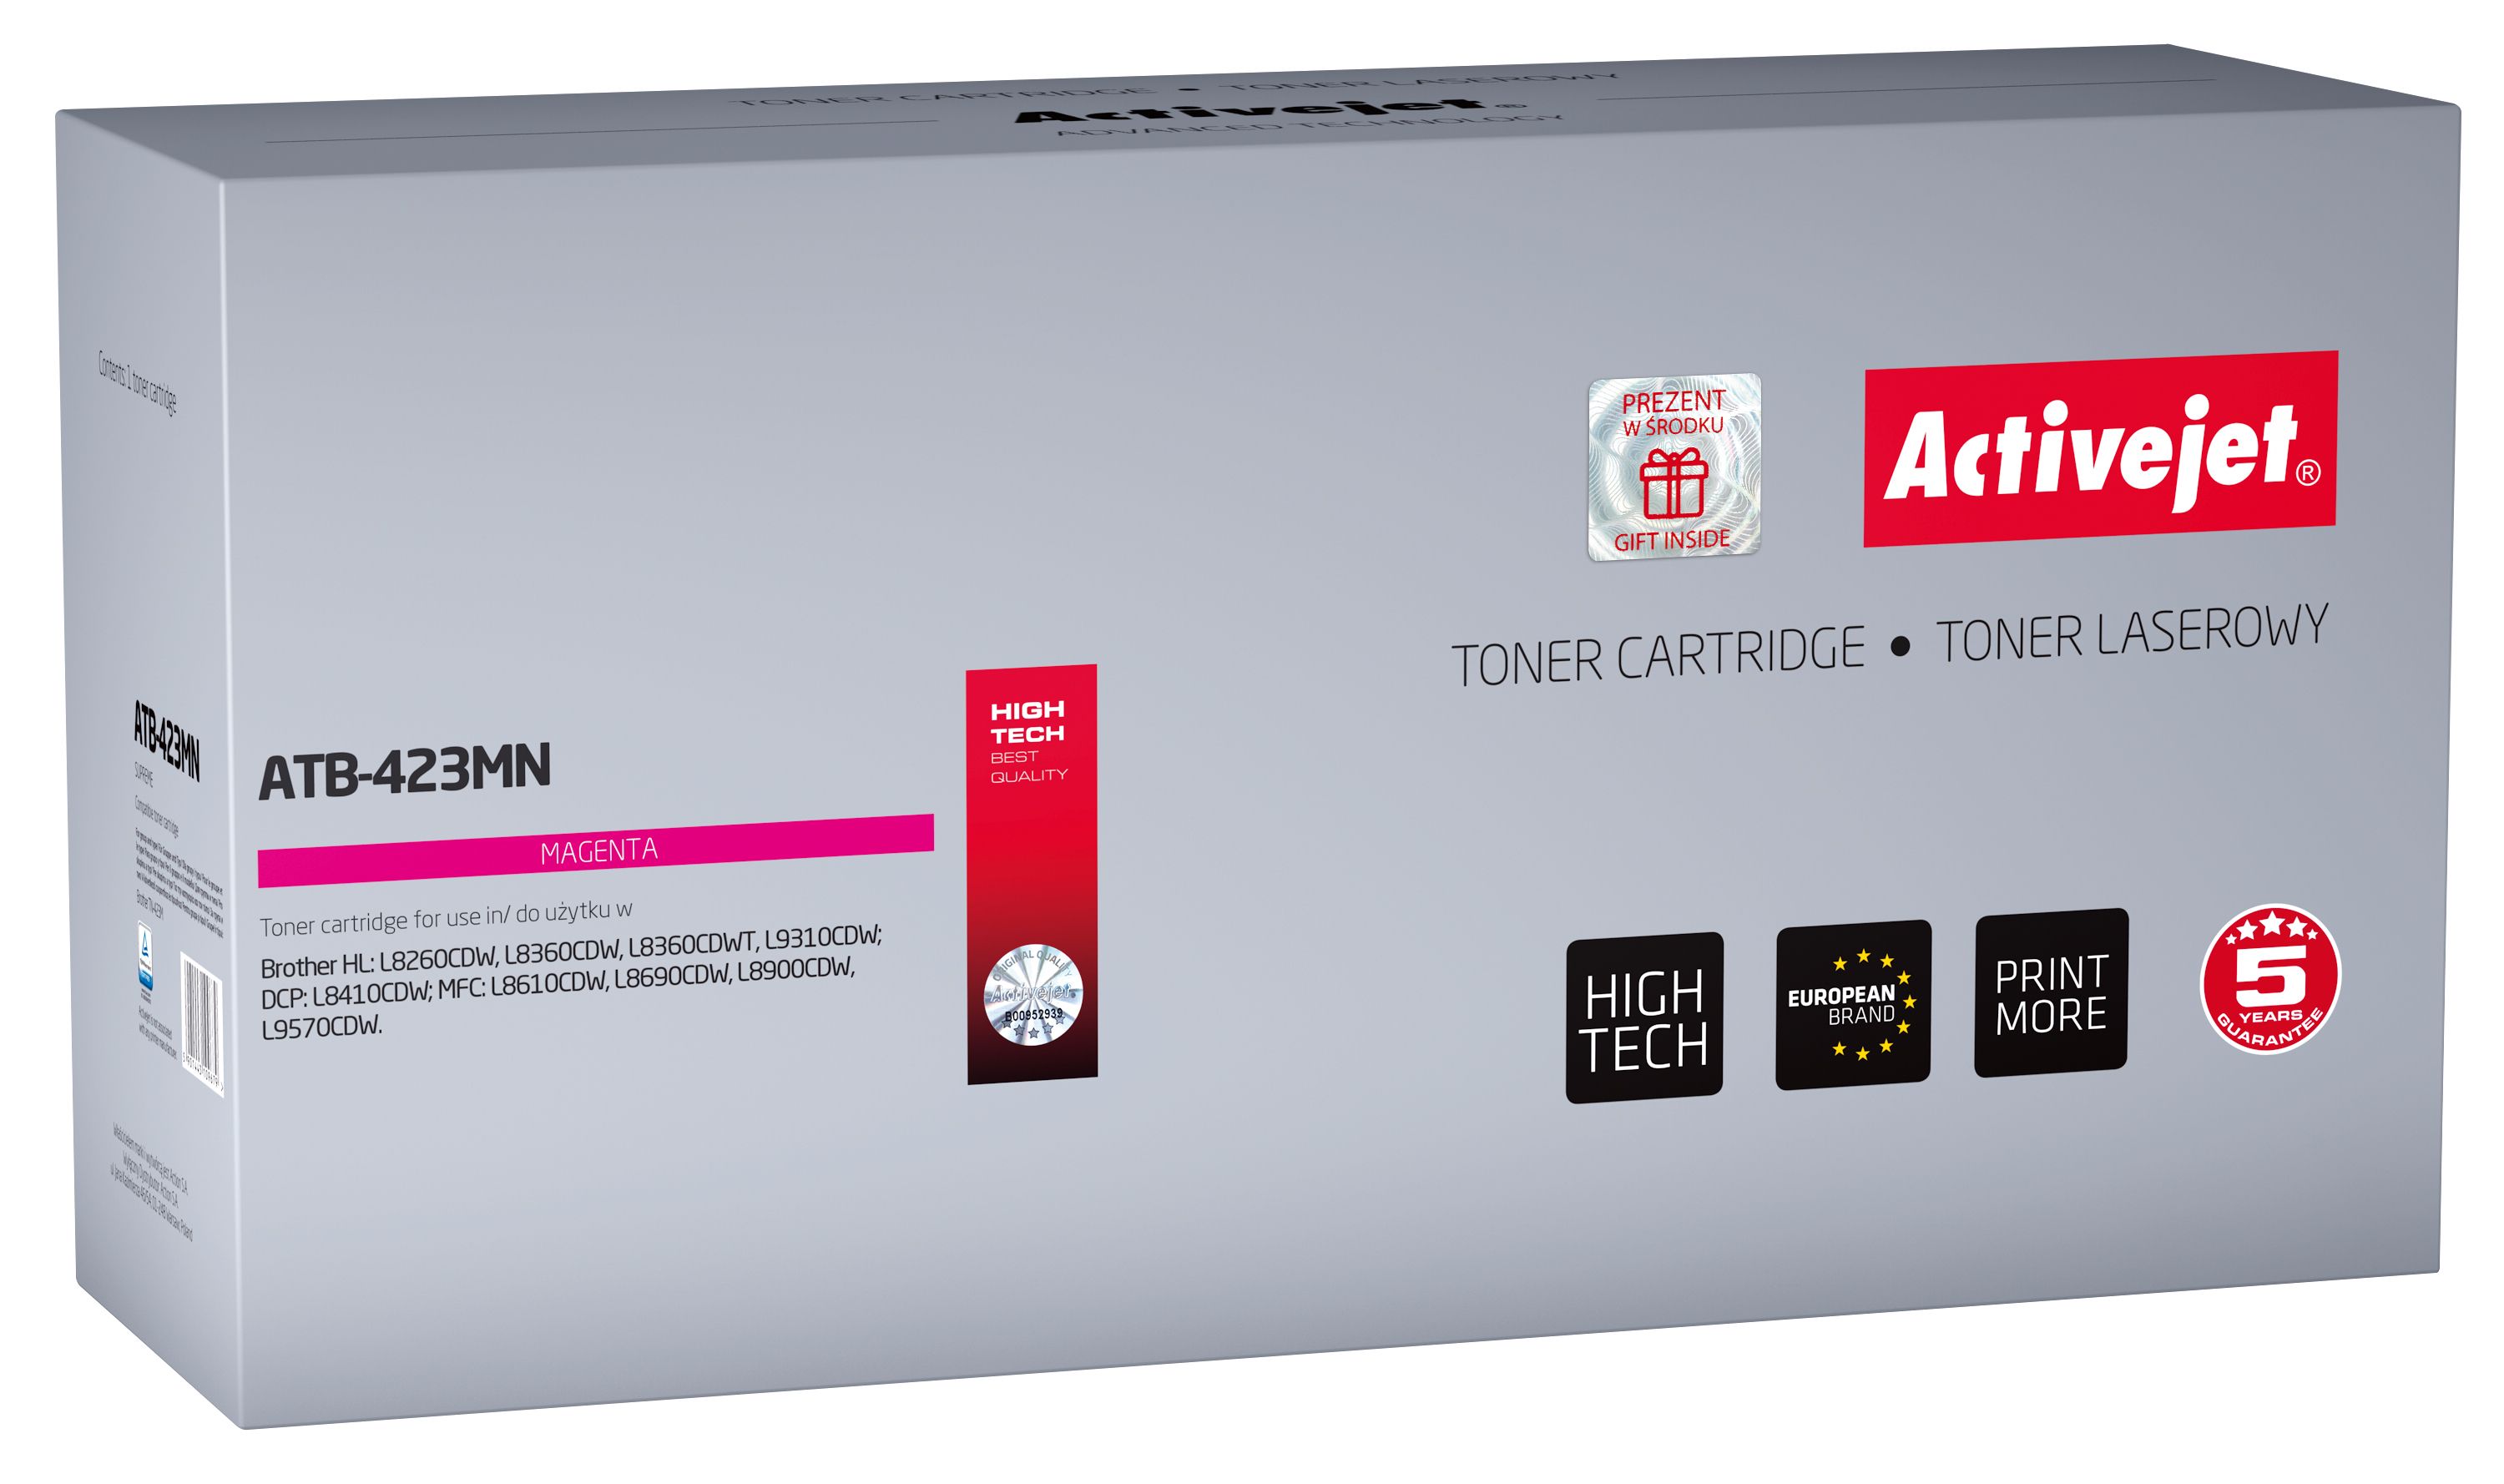 Activejet ATB-423MN toner for Brother printer; Brother TN-423M replacement; Supreme; 4000 pages; magenta